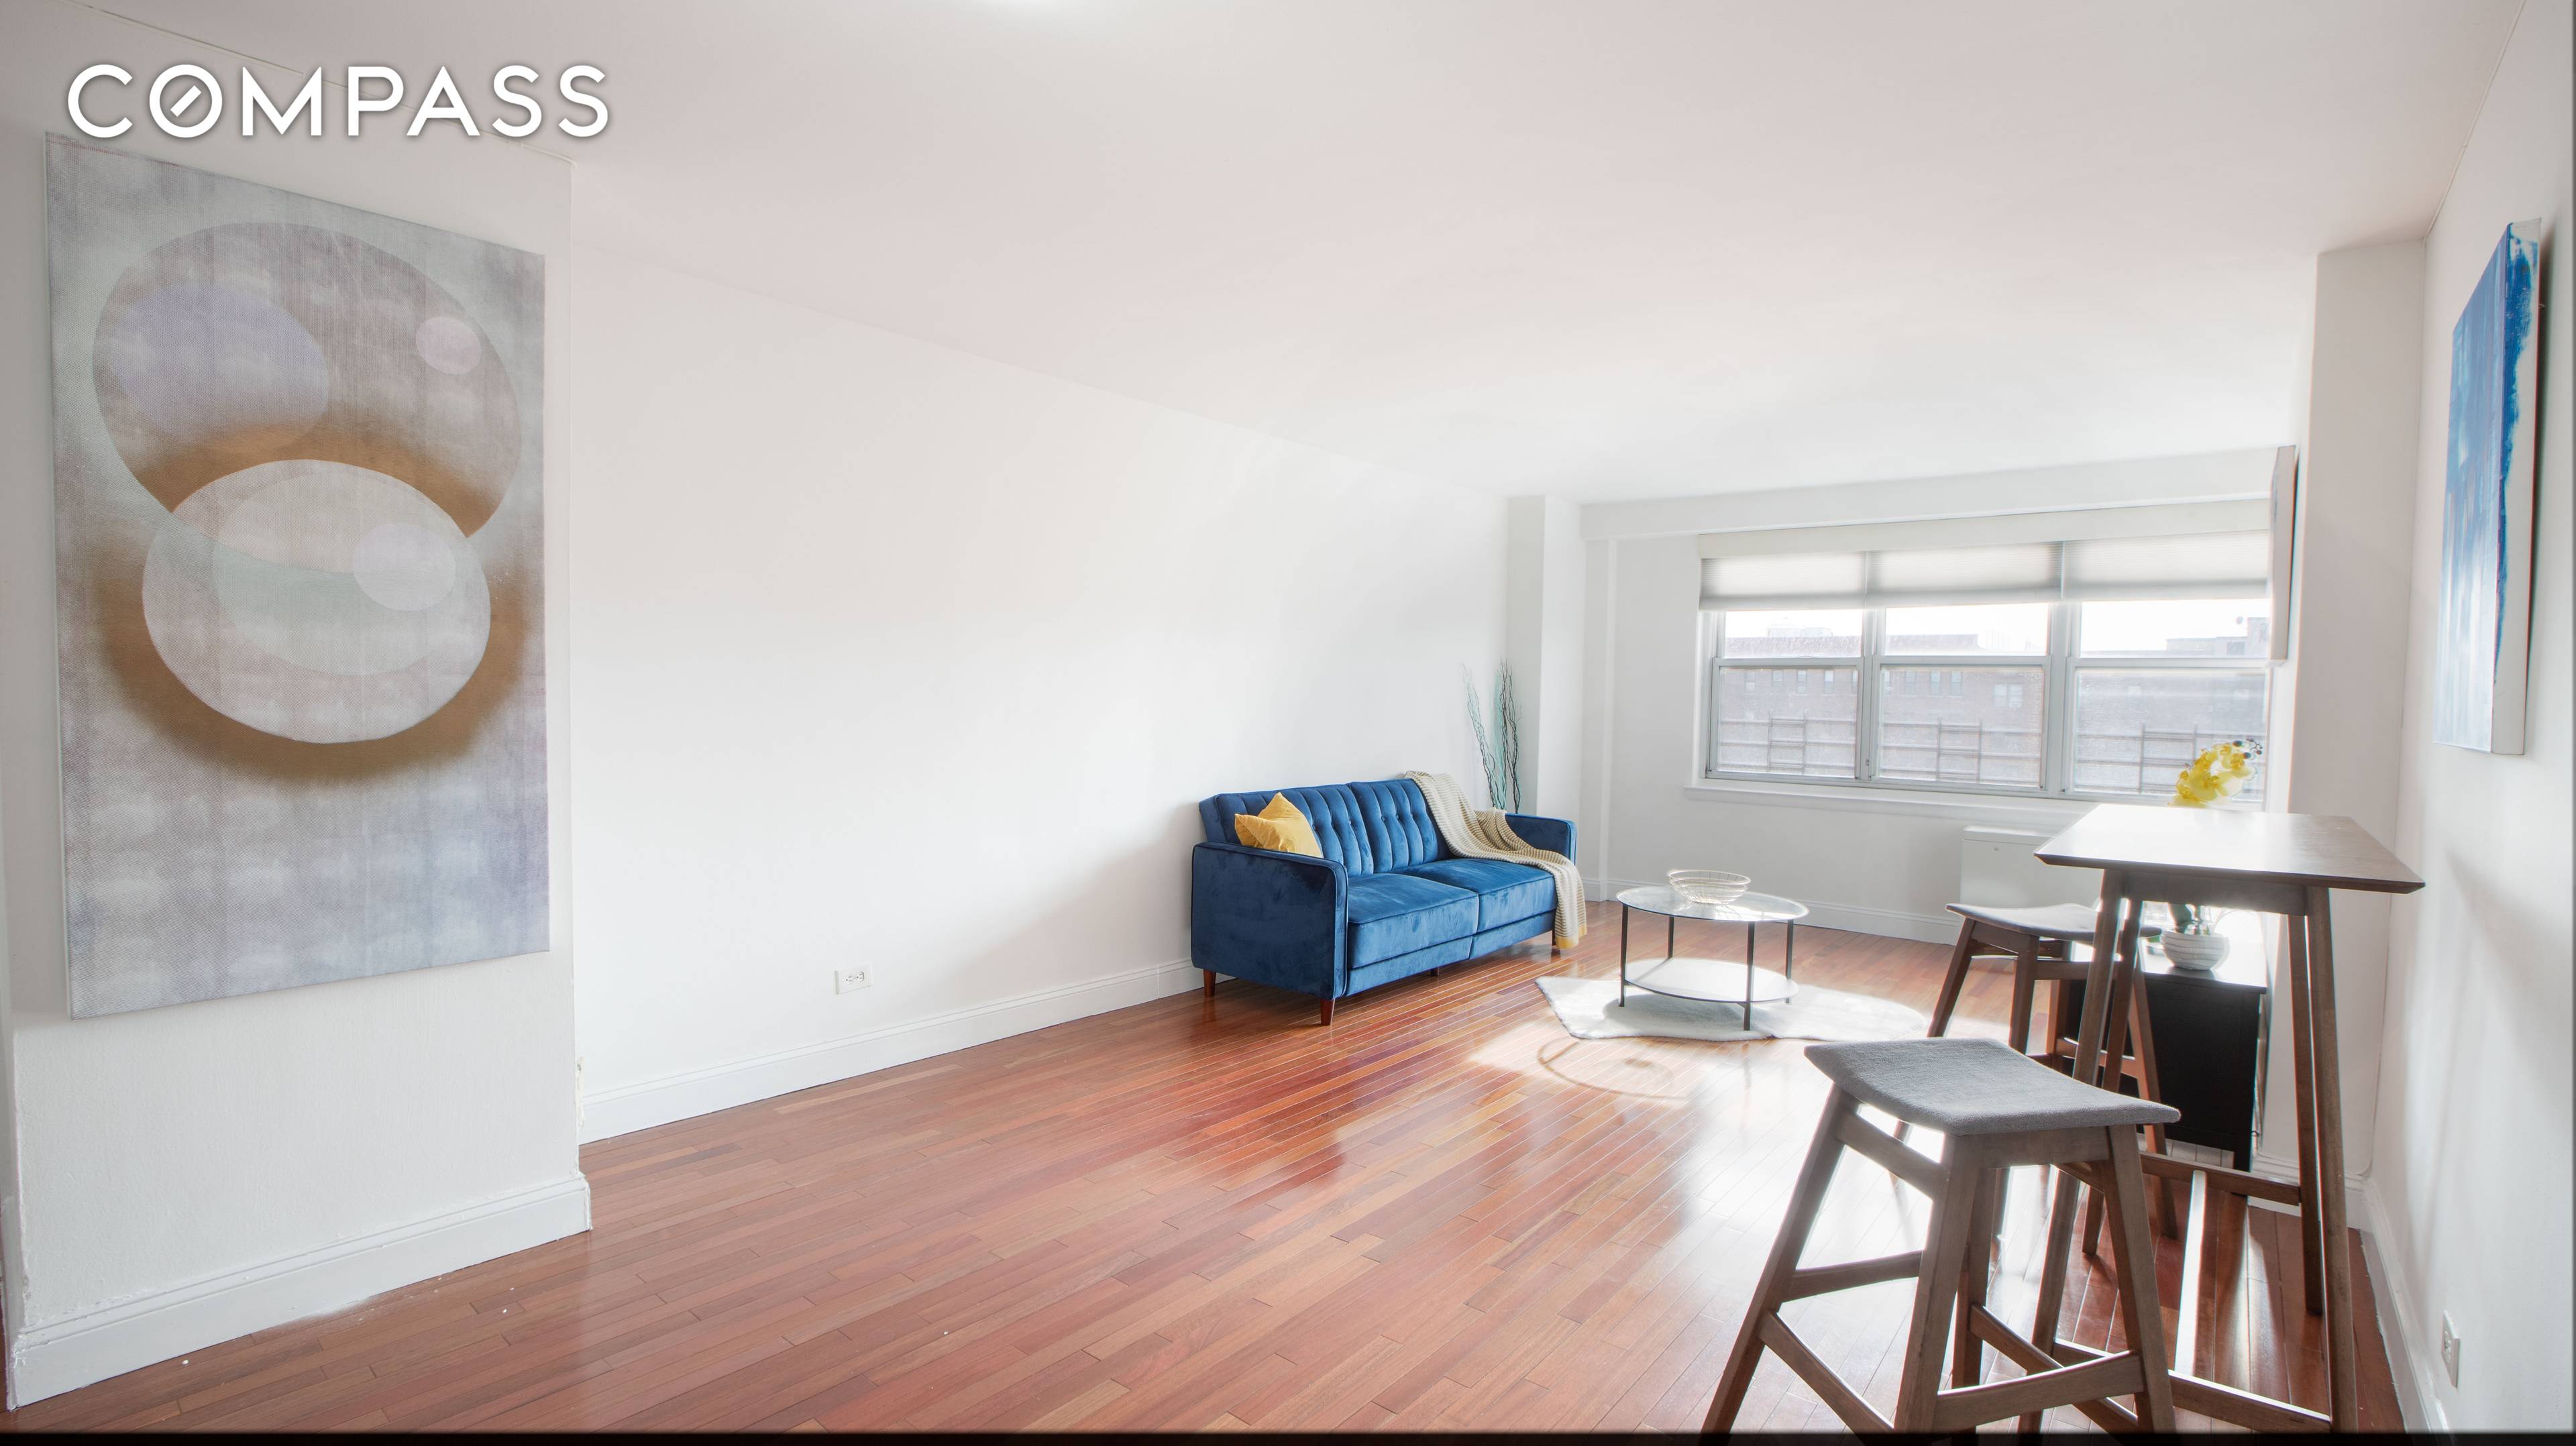 This converted two bedroom has everything you're looking for.